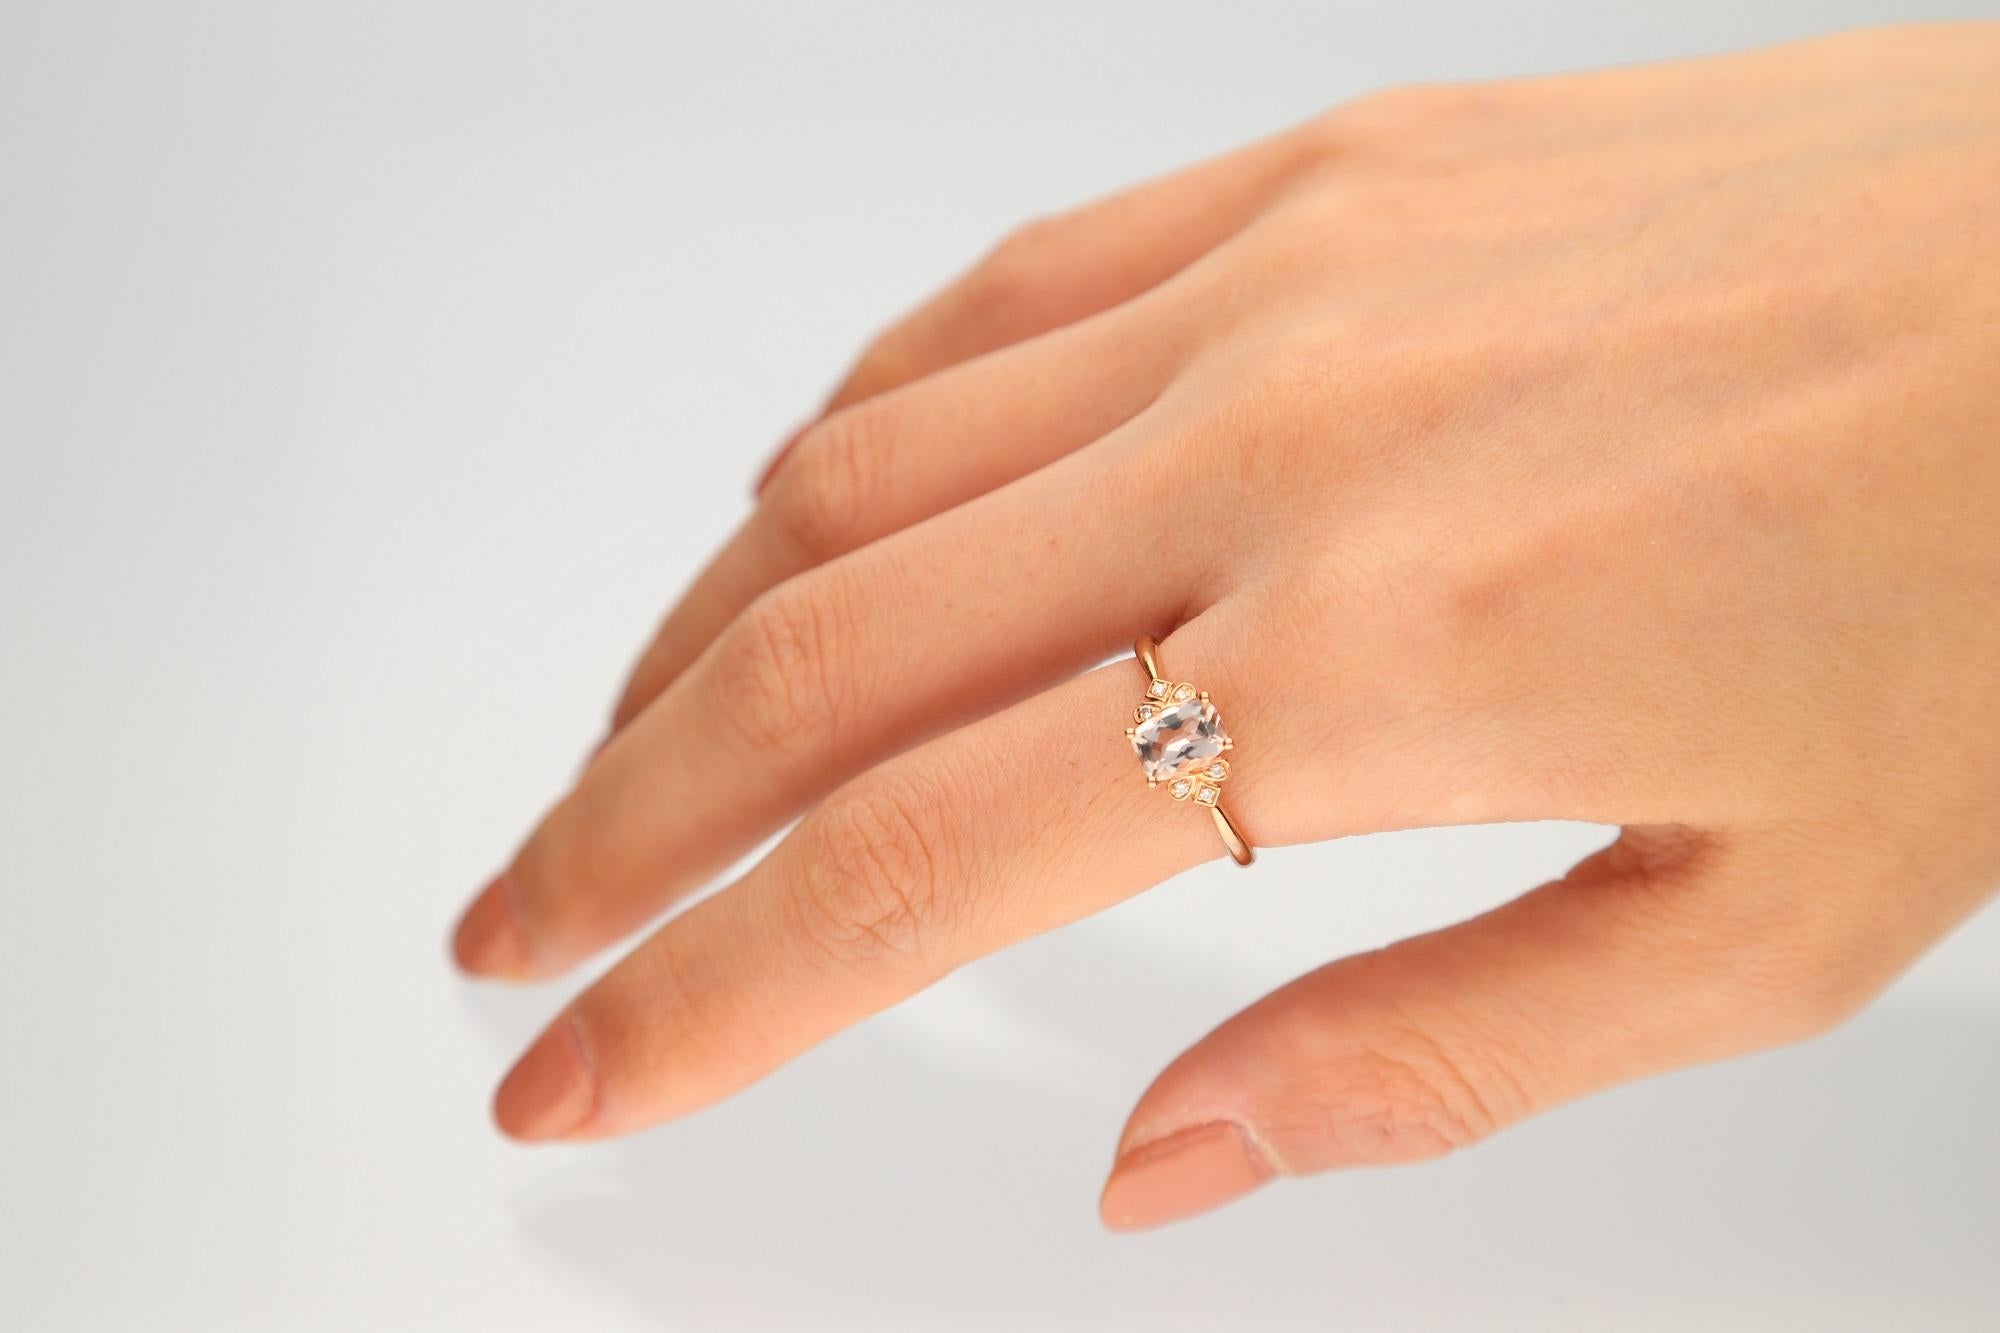 Stunning, timeless and classy eternity Unique ring. Decorate yourself in luxury with this Gin & Grace ring. The 10K Rose Gold jewelry boasts Cushion-Cut Prong Setting Genuine Morganite (1pcs) 0.83 Carat and Round-Cut Prong Setting Diamond (6 pcs)